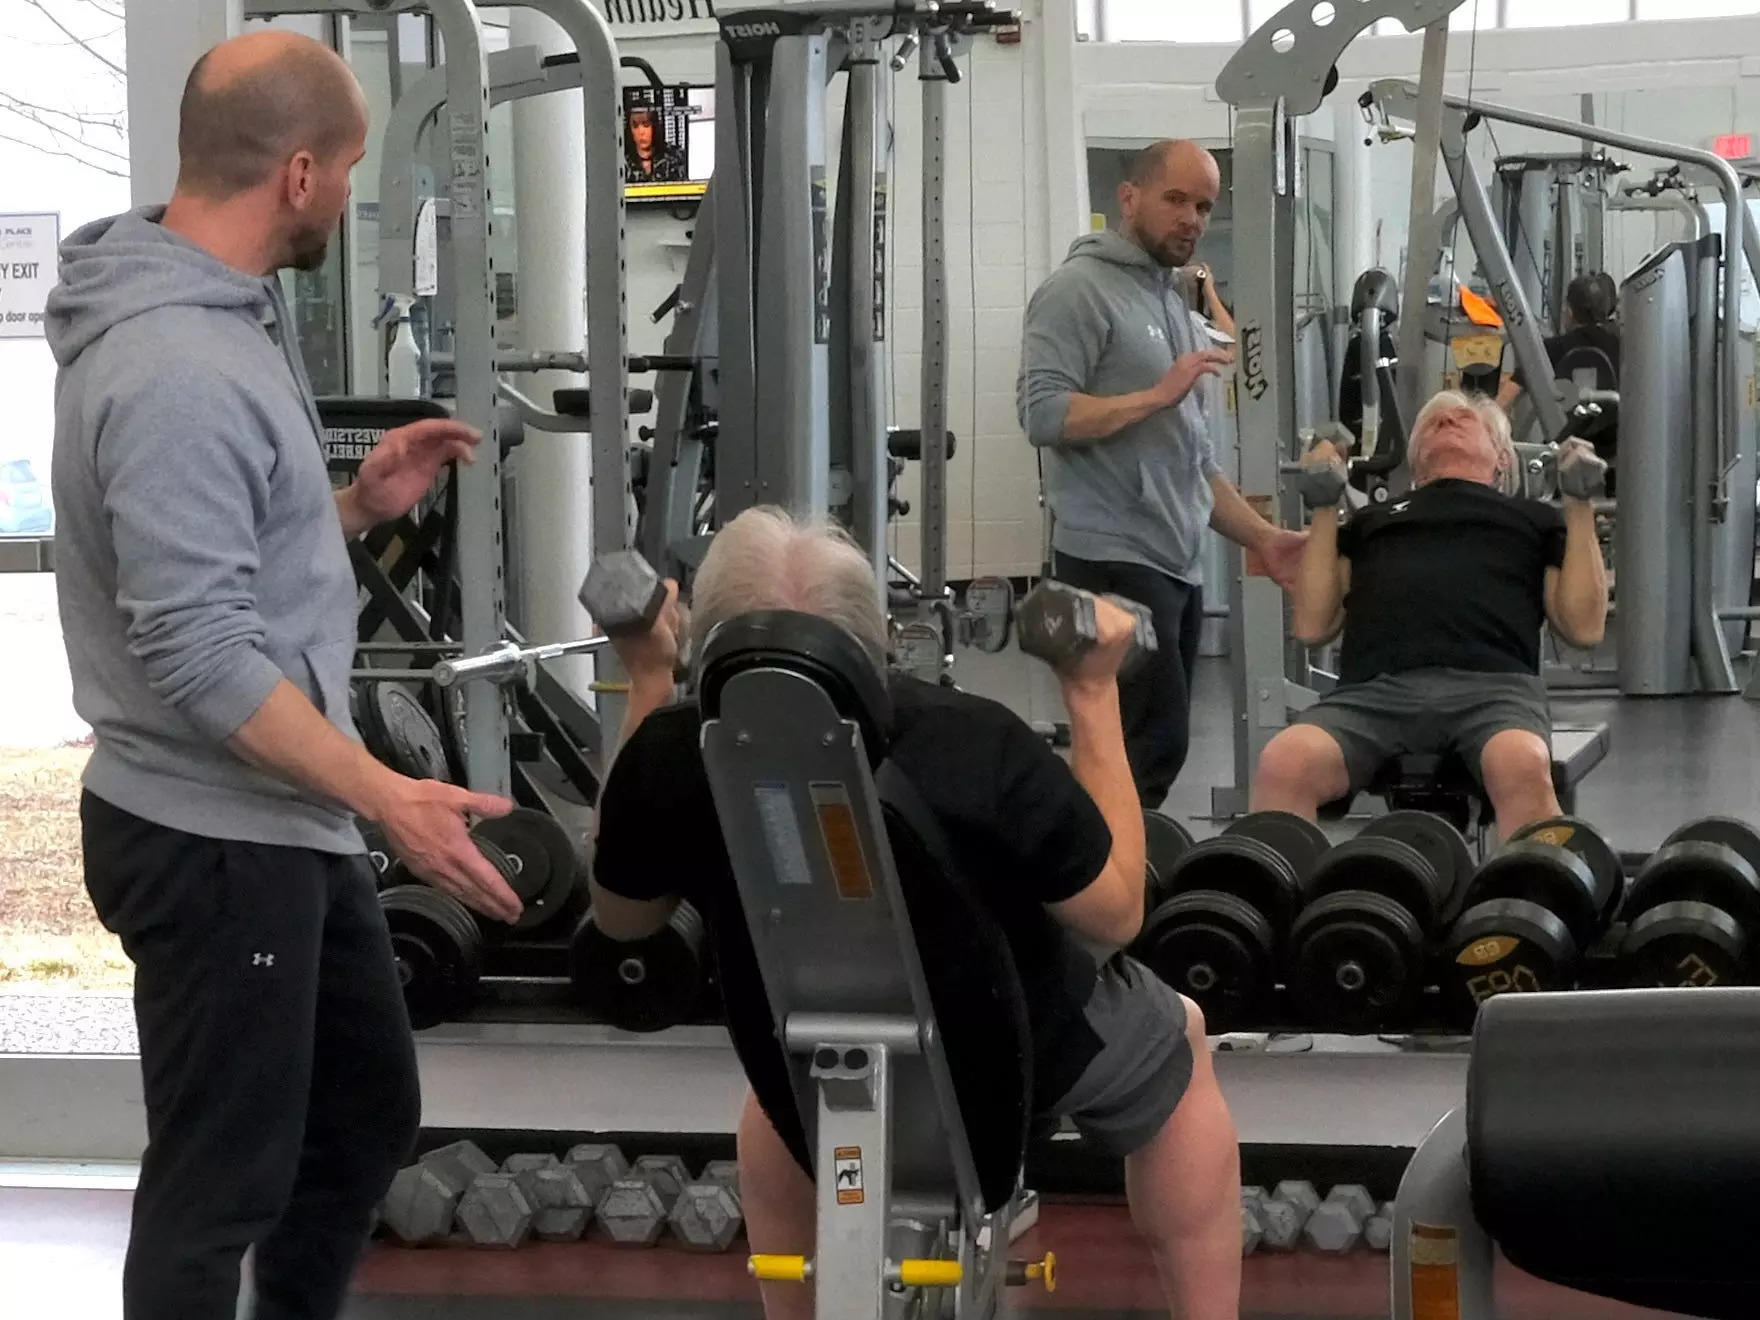 Barry sits on a workout bench and lifts weights. His trainer spots him and coaches him along.